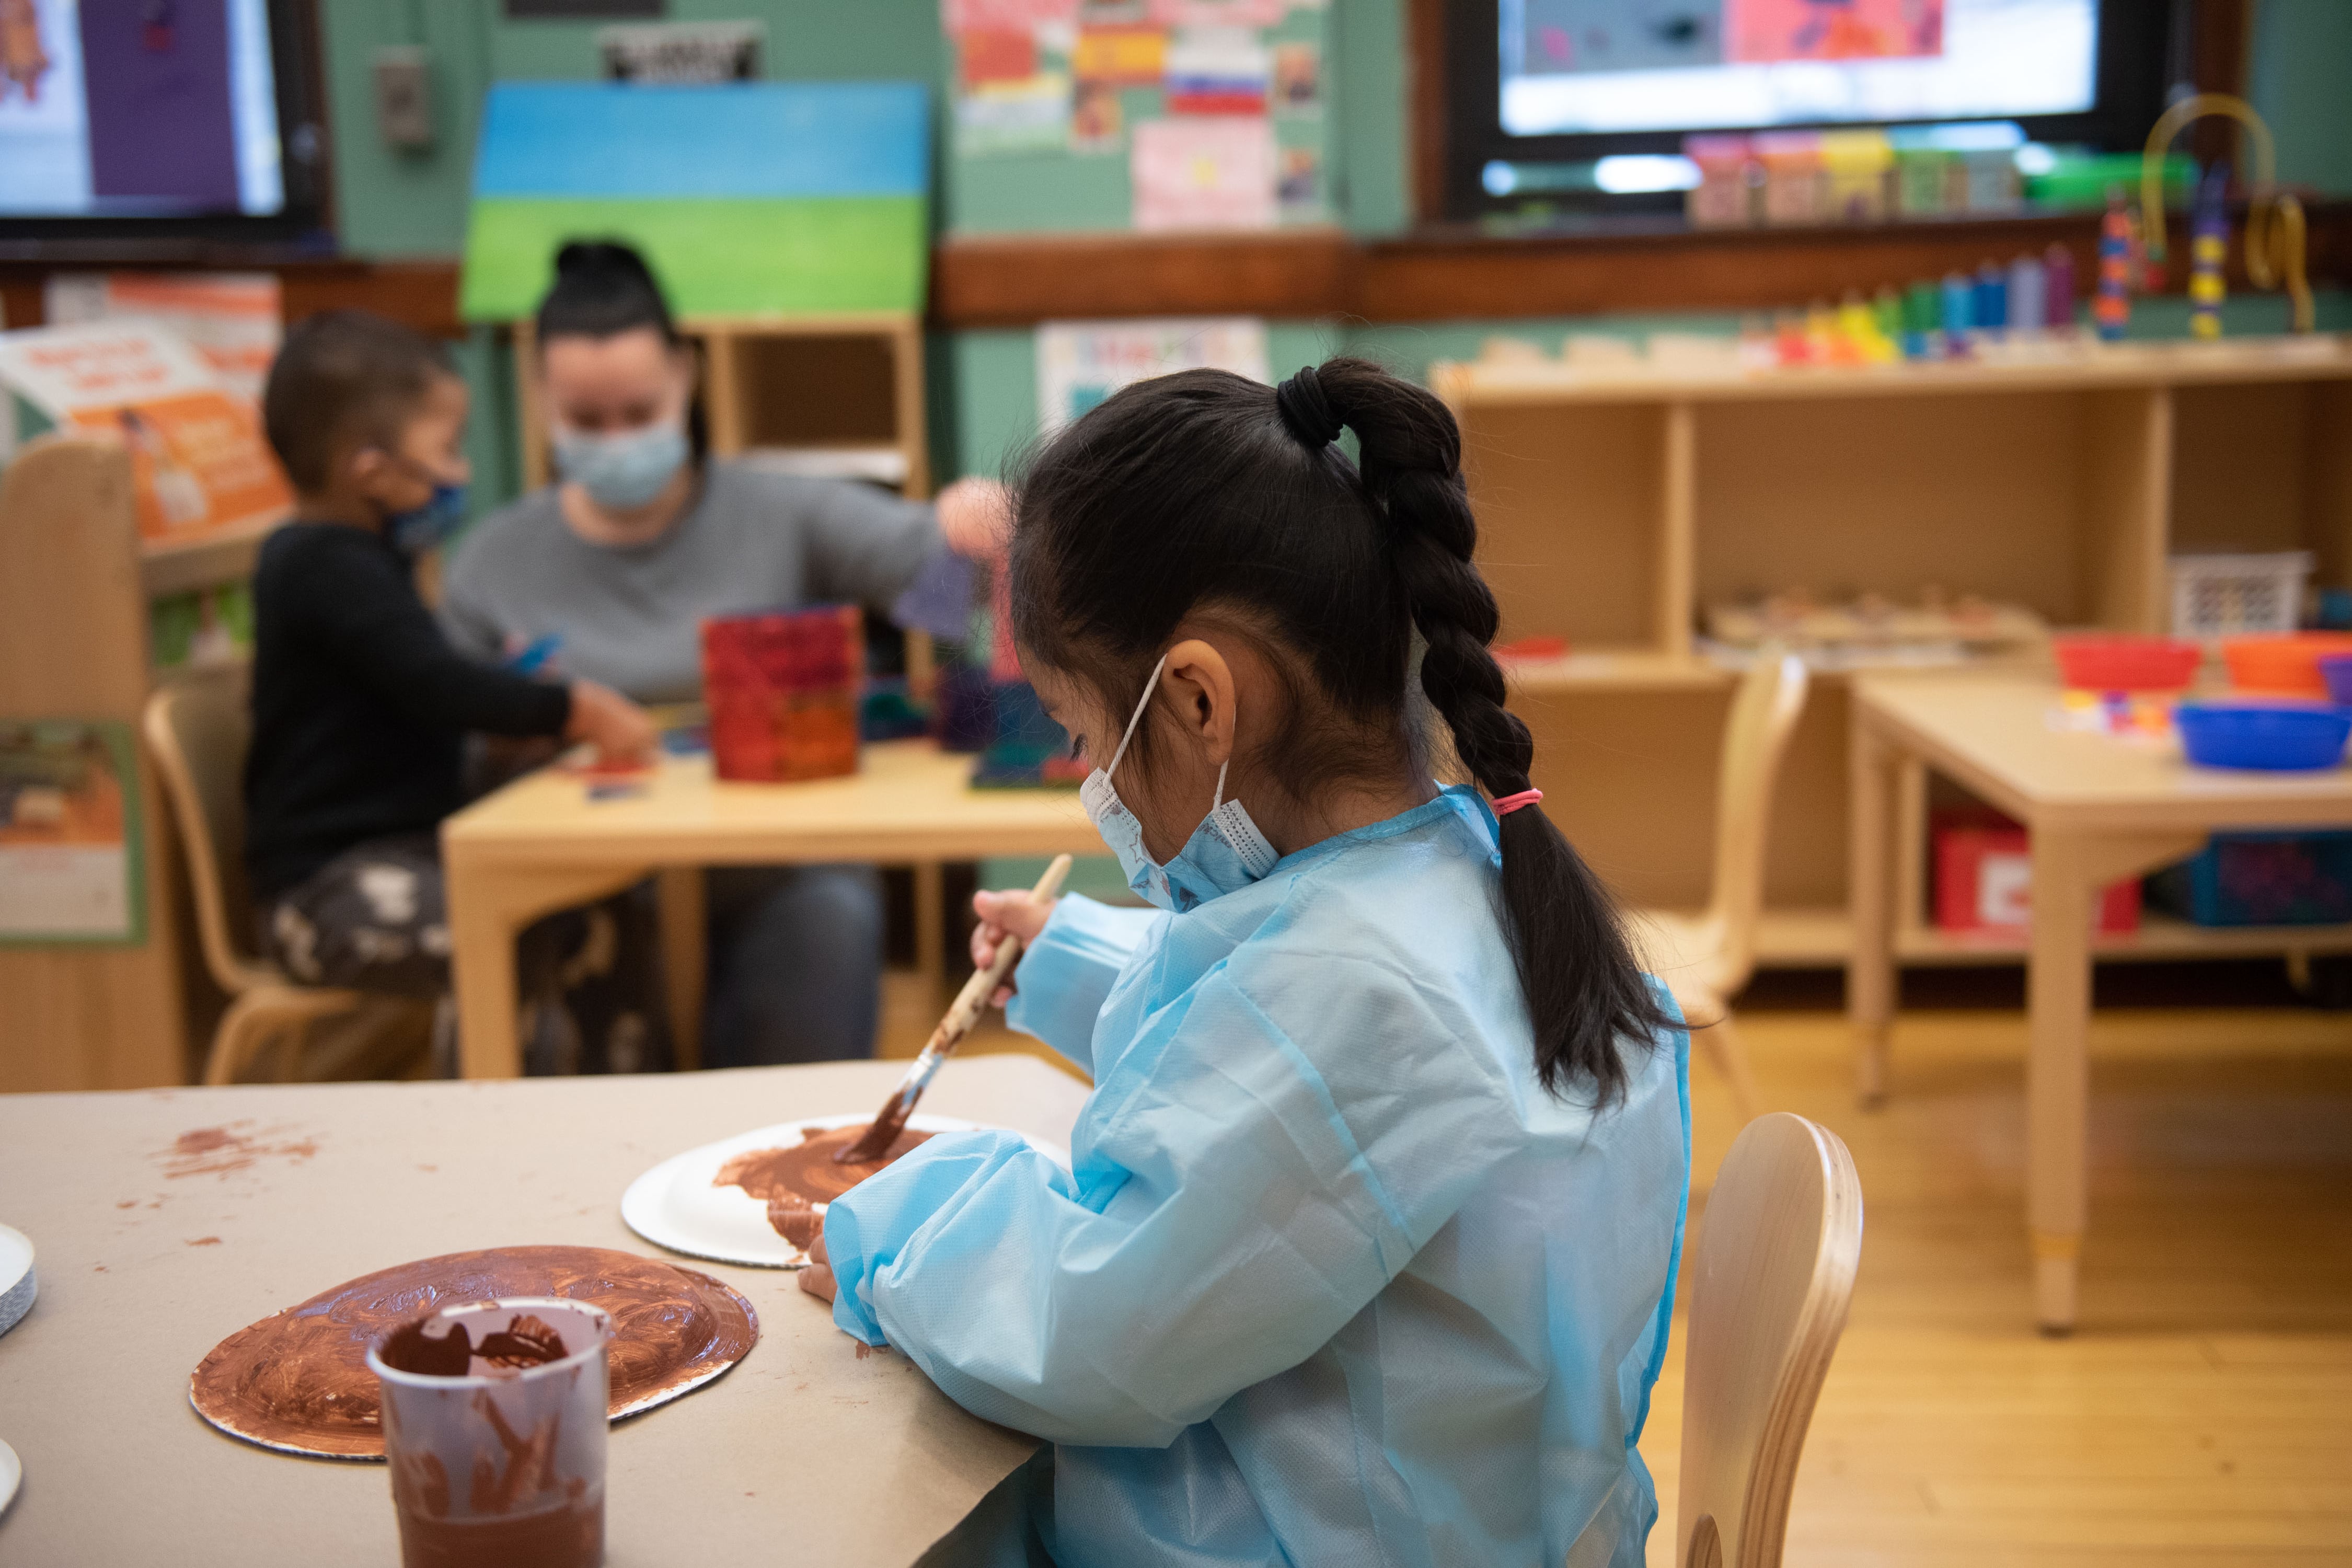 A student wearing a mask on her face and a blue smock to cover her clothes uses brown paint on paper plates.